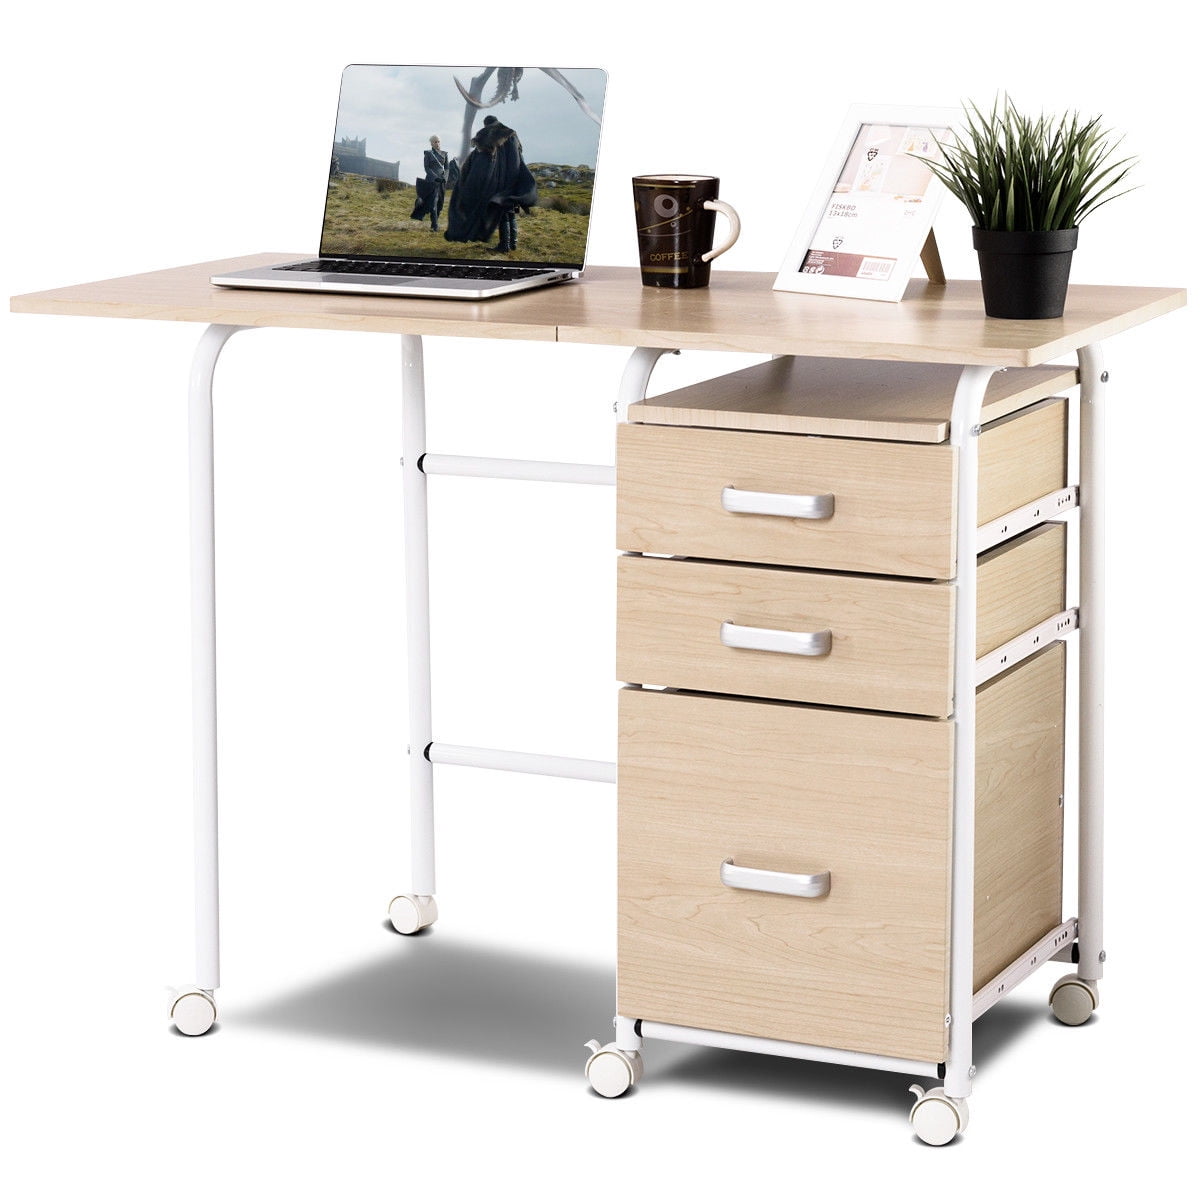 Gymax Folding Computer Laptop Desk Wheeled Home Office